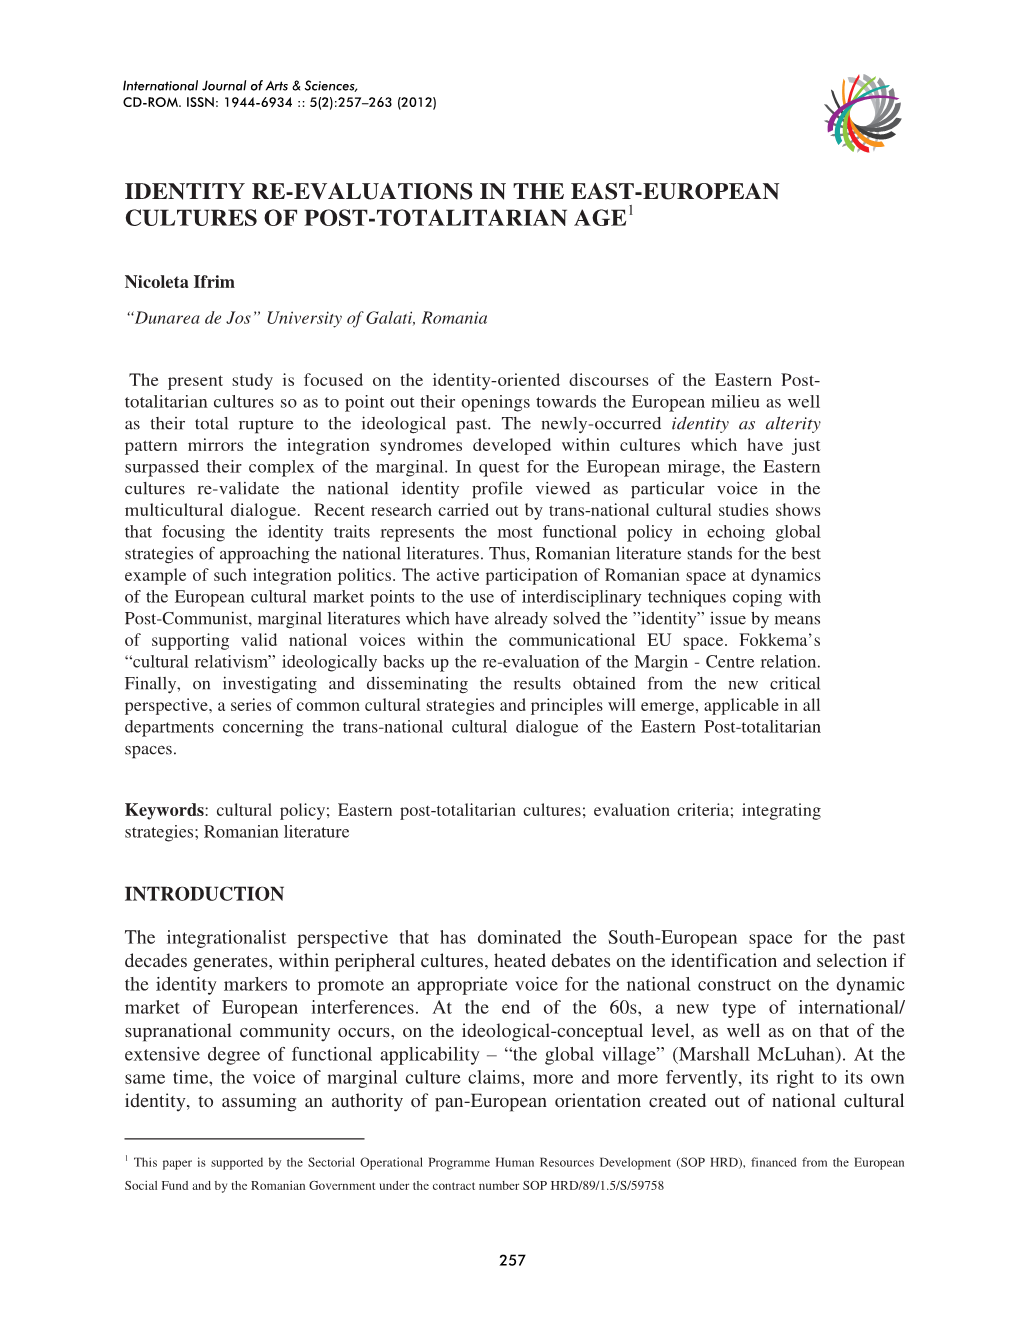 Identity Re-Evaluations in the East-European Cultures of Post-Totalitarian Age1